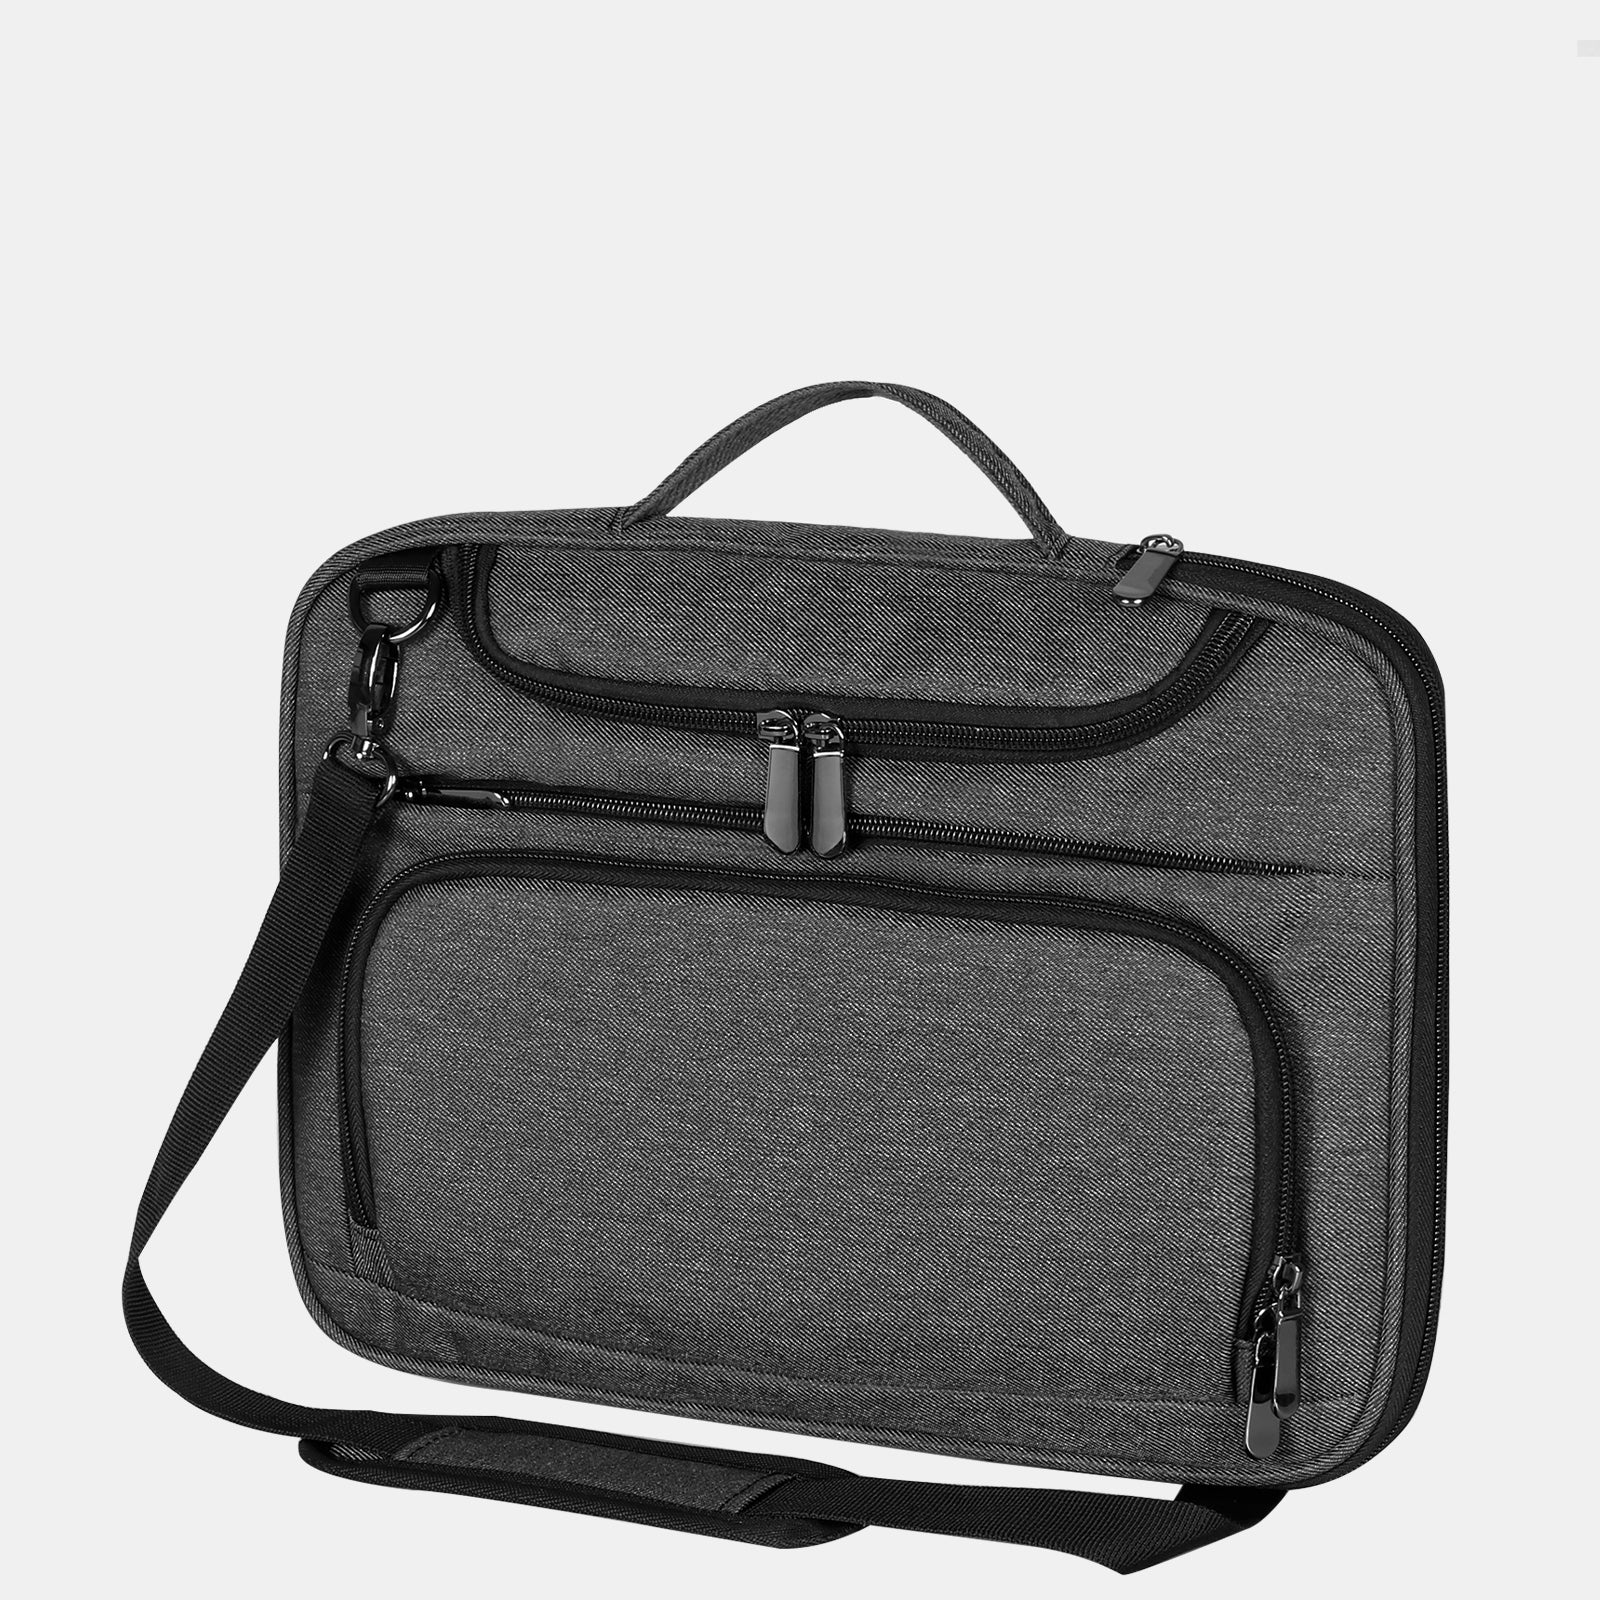 Bertasche 13 inch Tablet Sleeve Bag with Strap